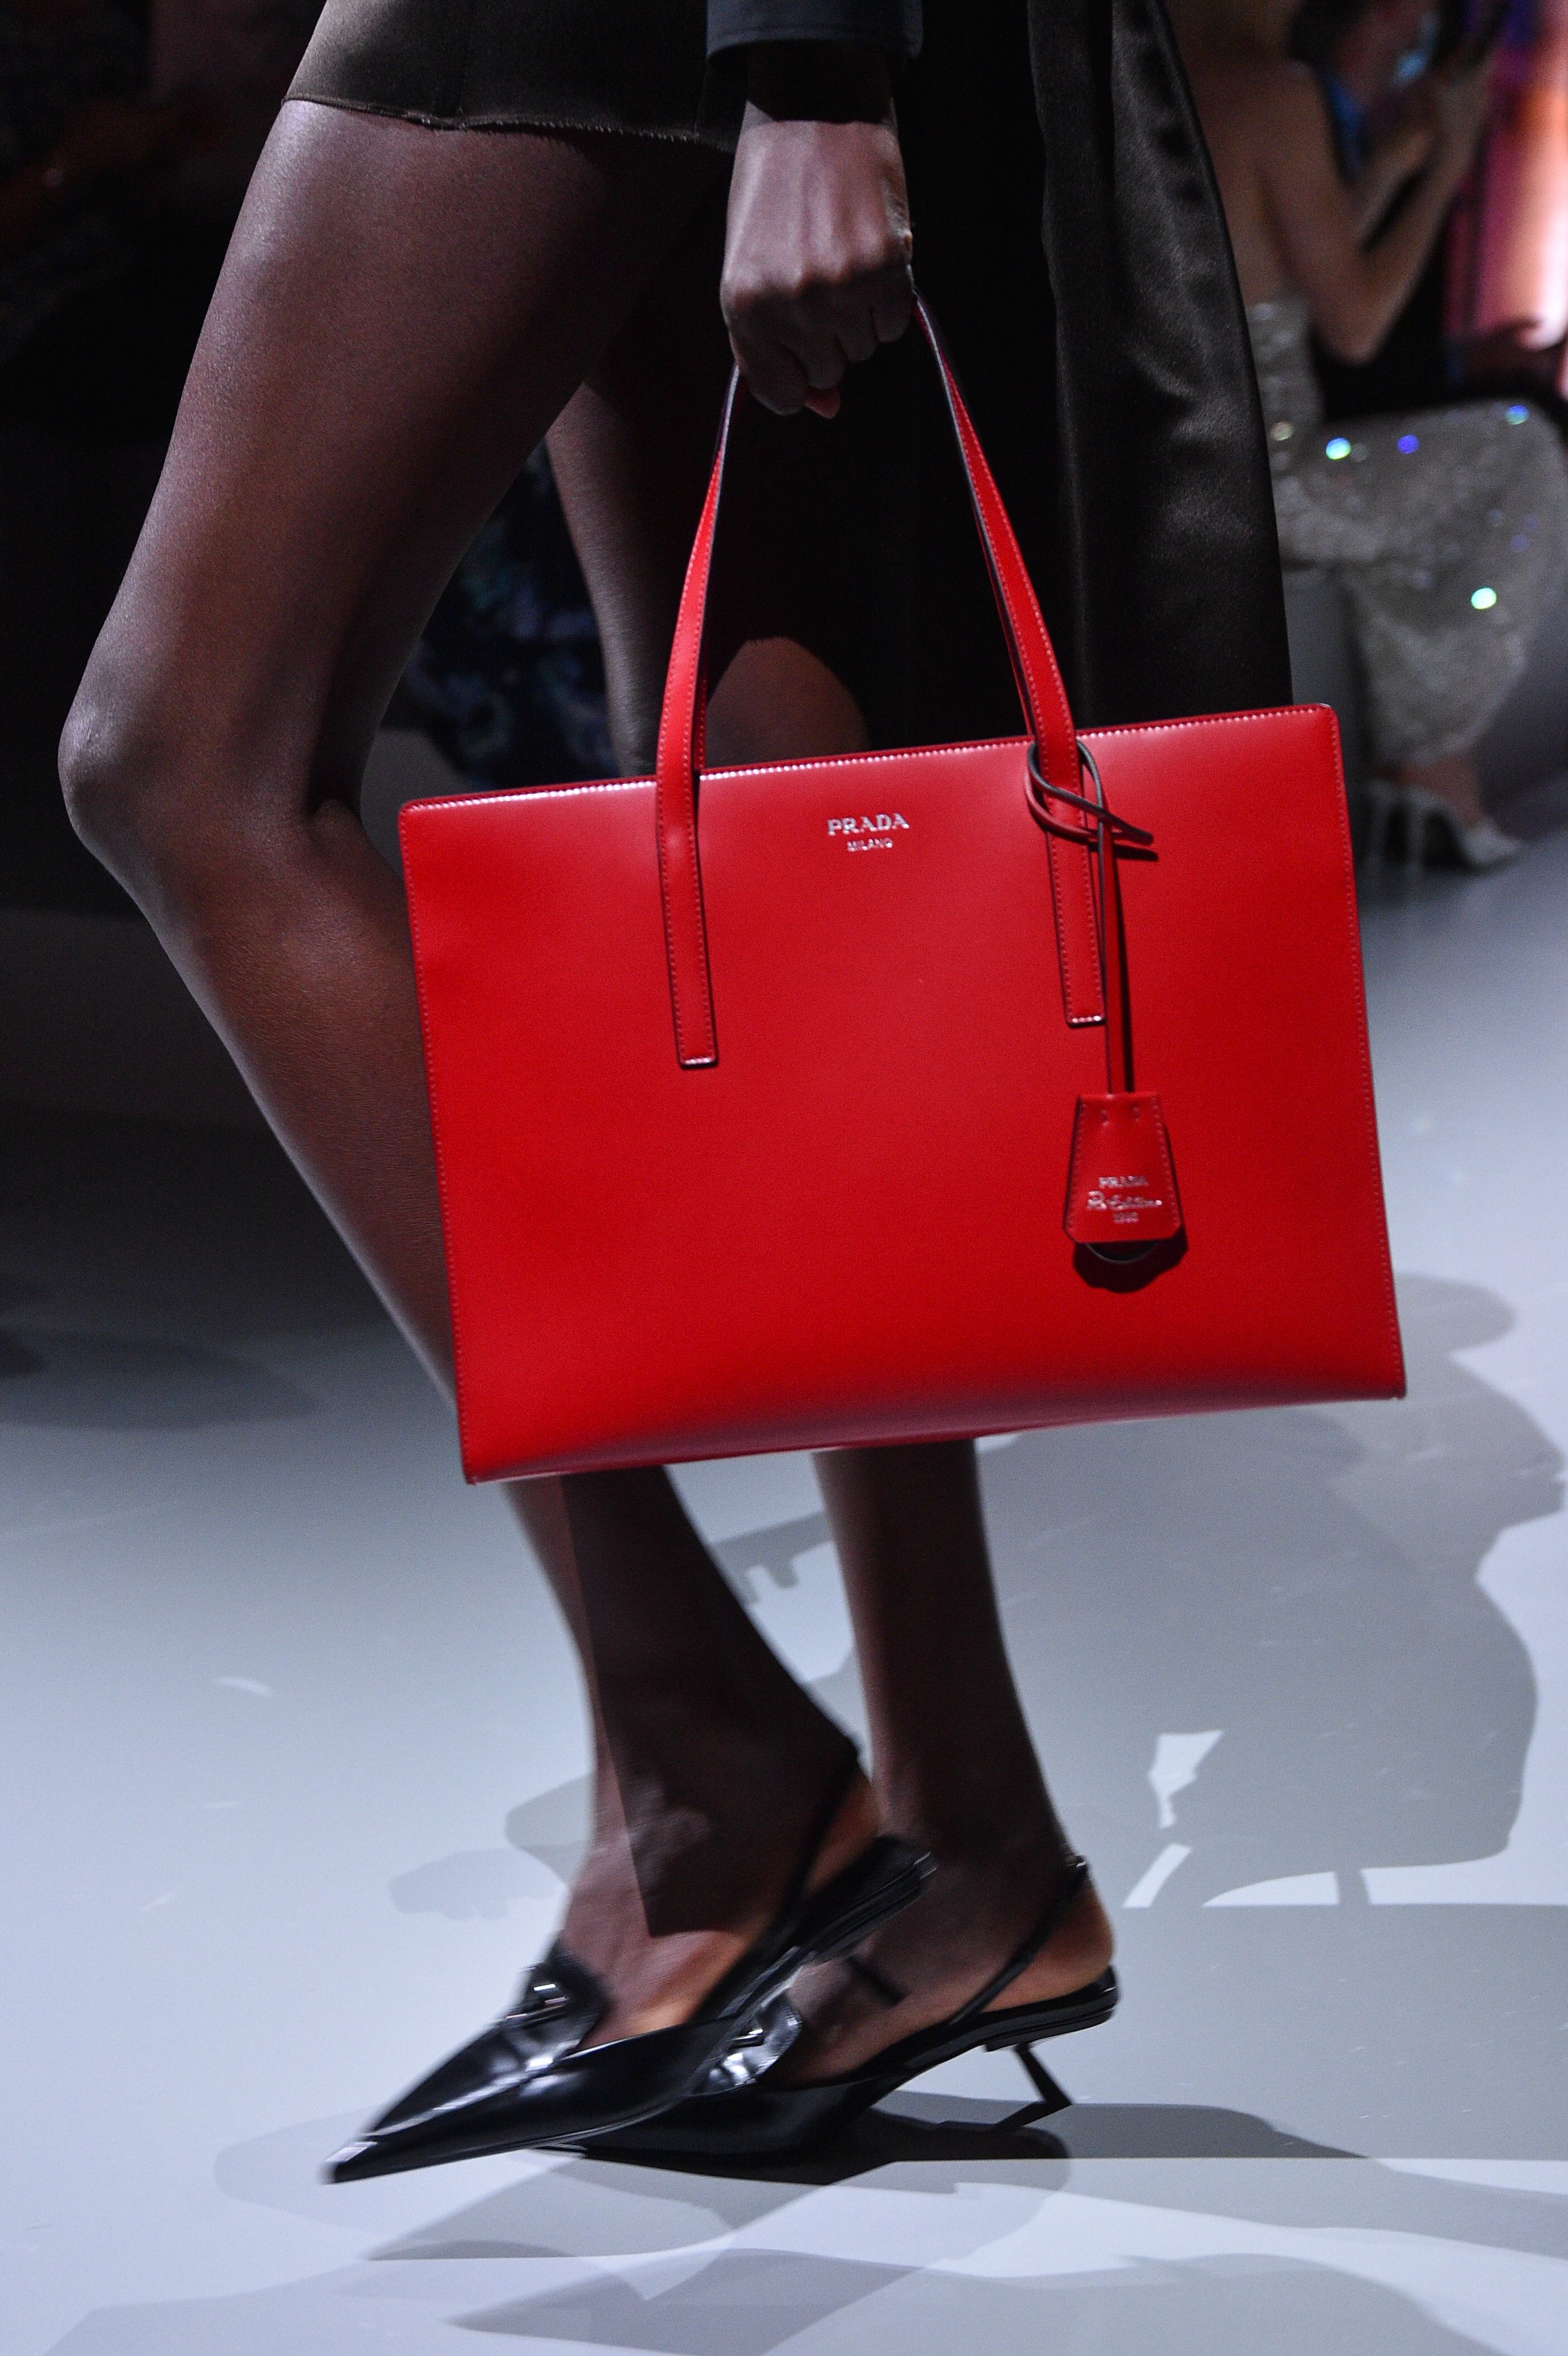 Red details. This is my new Favourite bag for the summer season